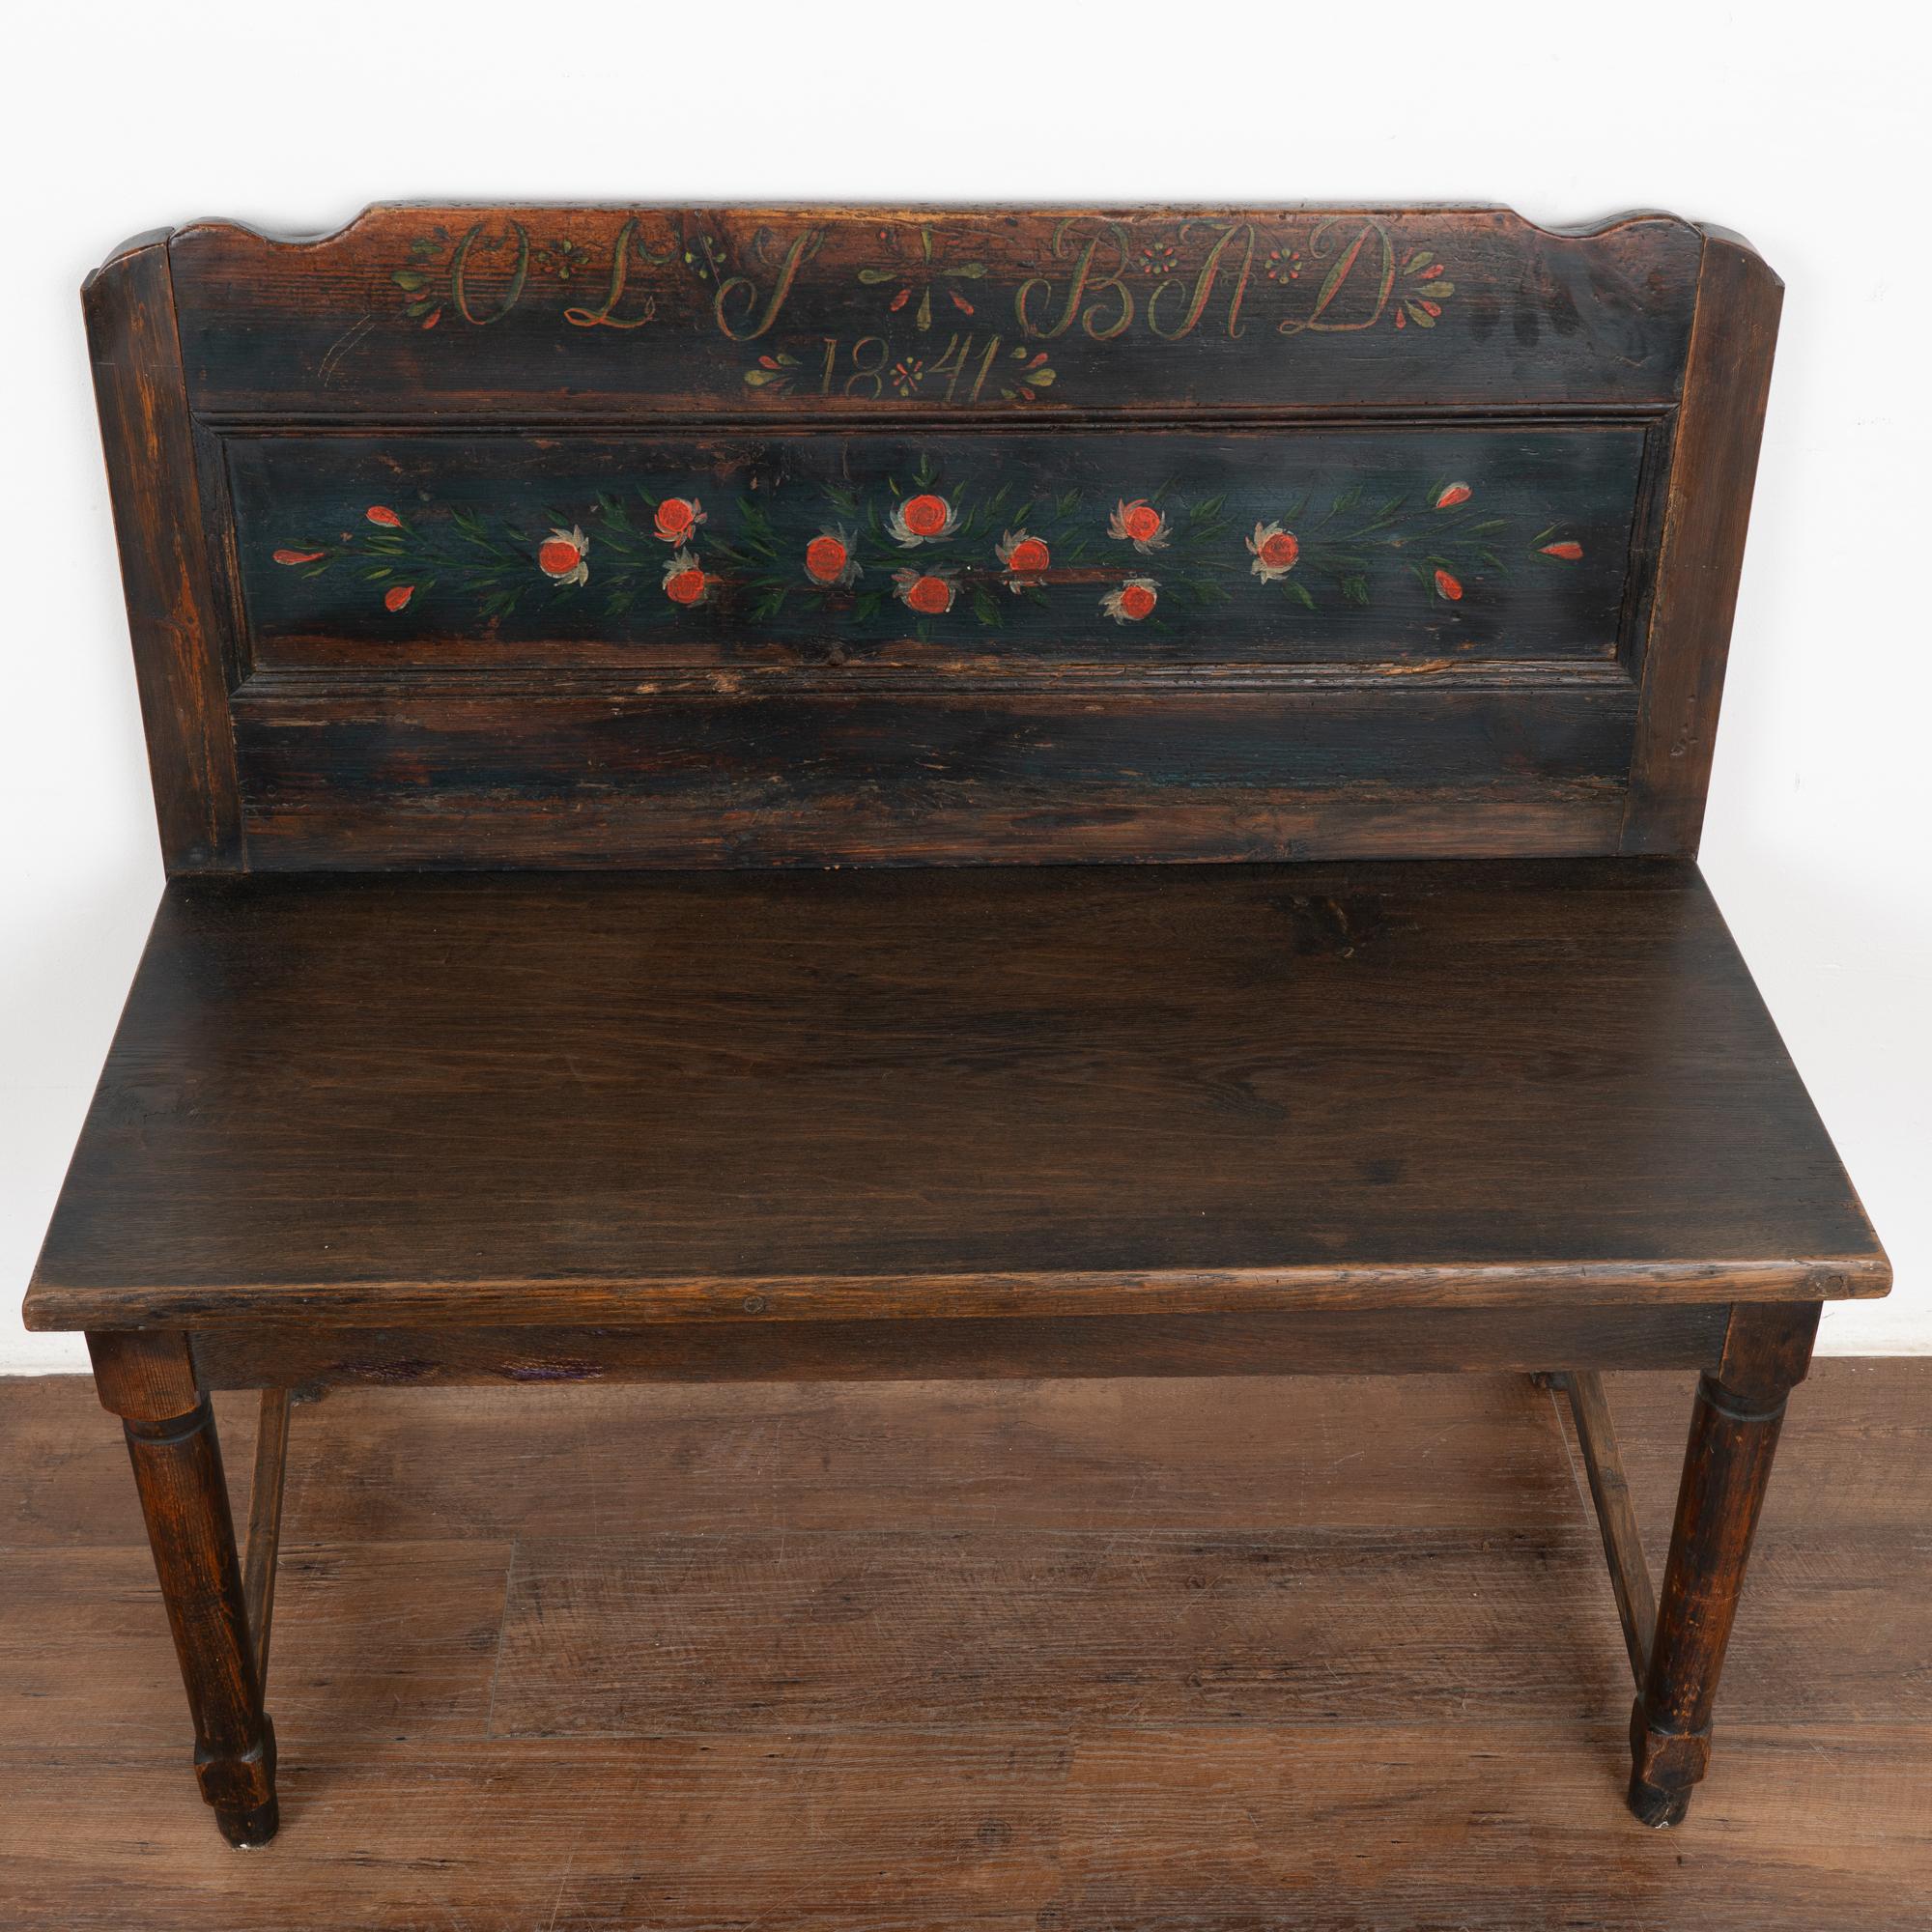 Hungarian Original Painted Small Bench, Hungary Dated 1841